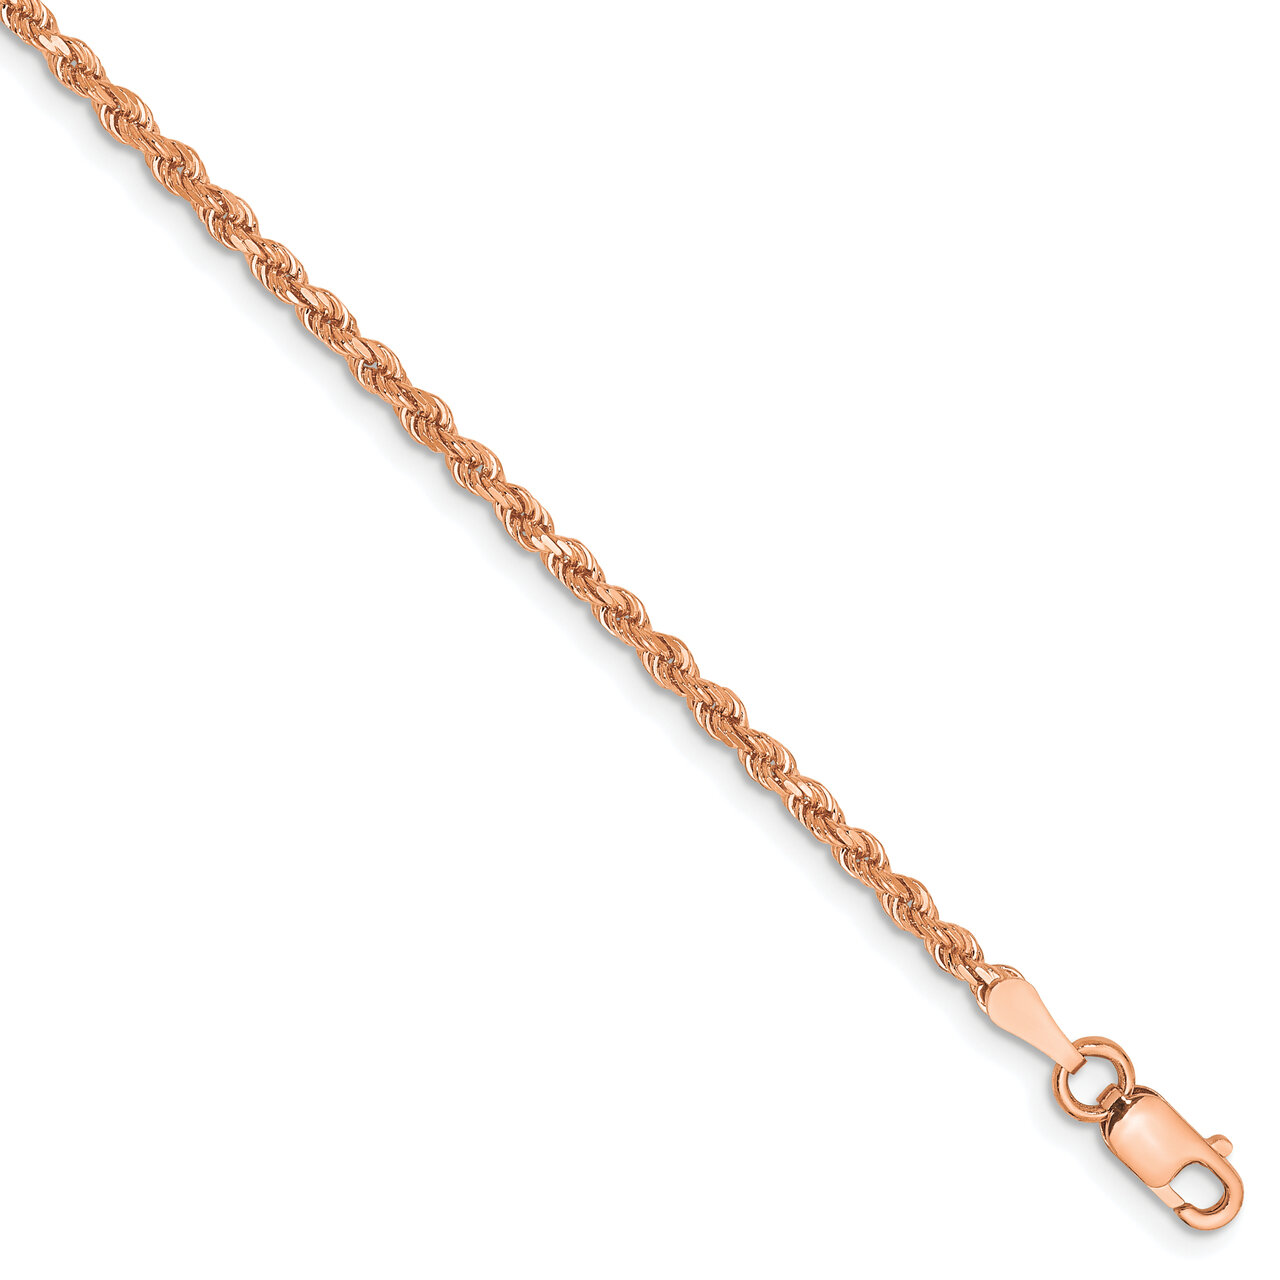 7 Inch 2mm Diamond-cut Rope with Lobster Clasp Chain 14k Rose Gold 016R-7